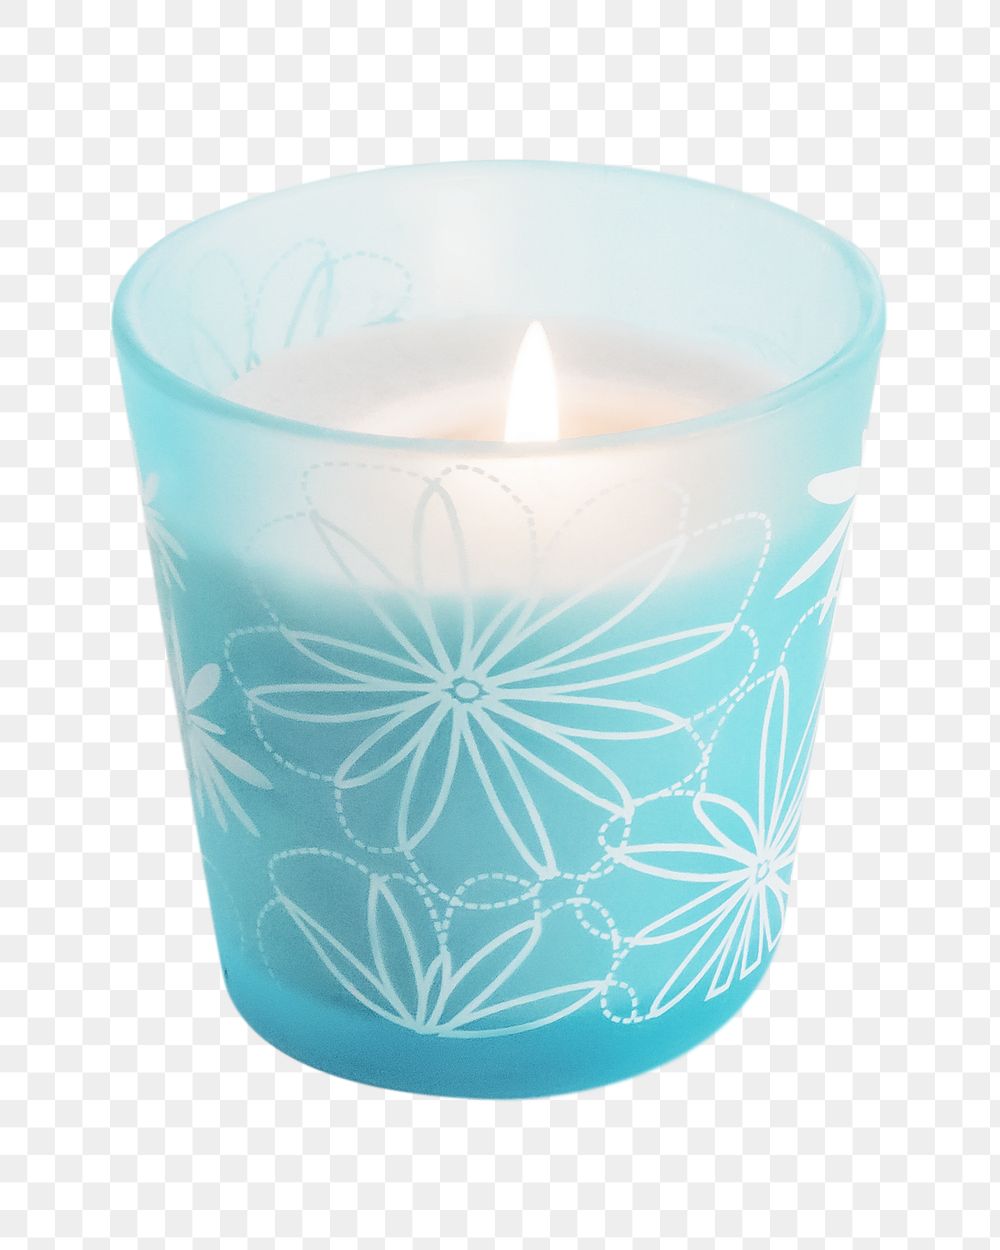 Lit scented candle png, transparent background